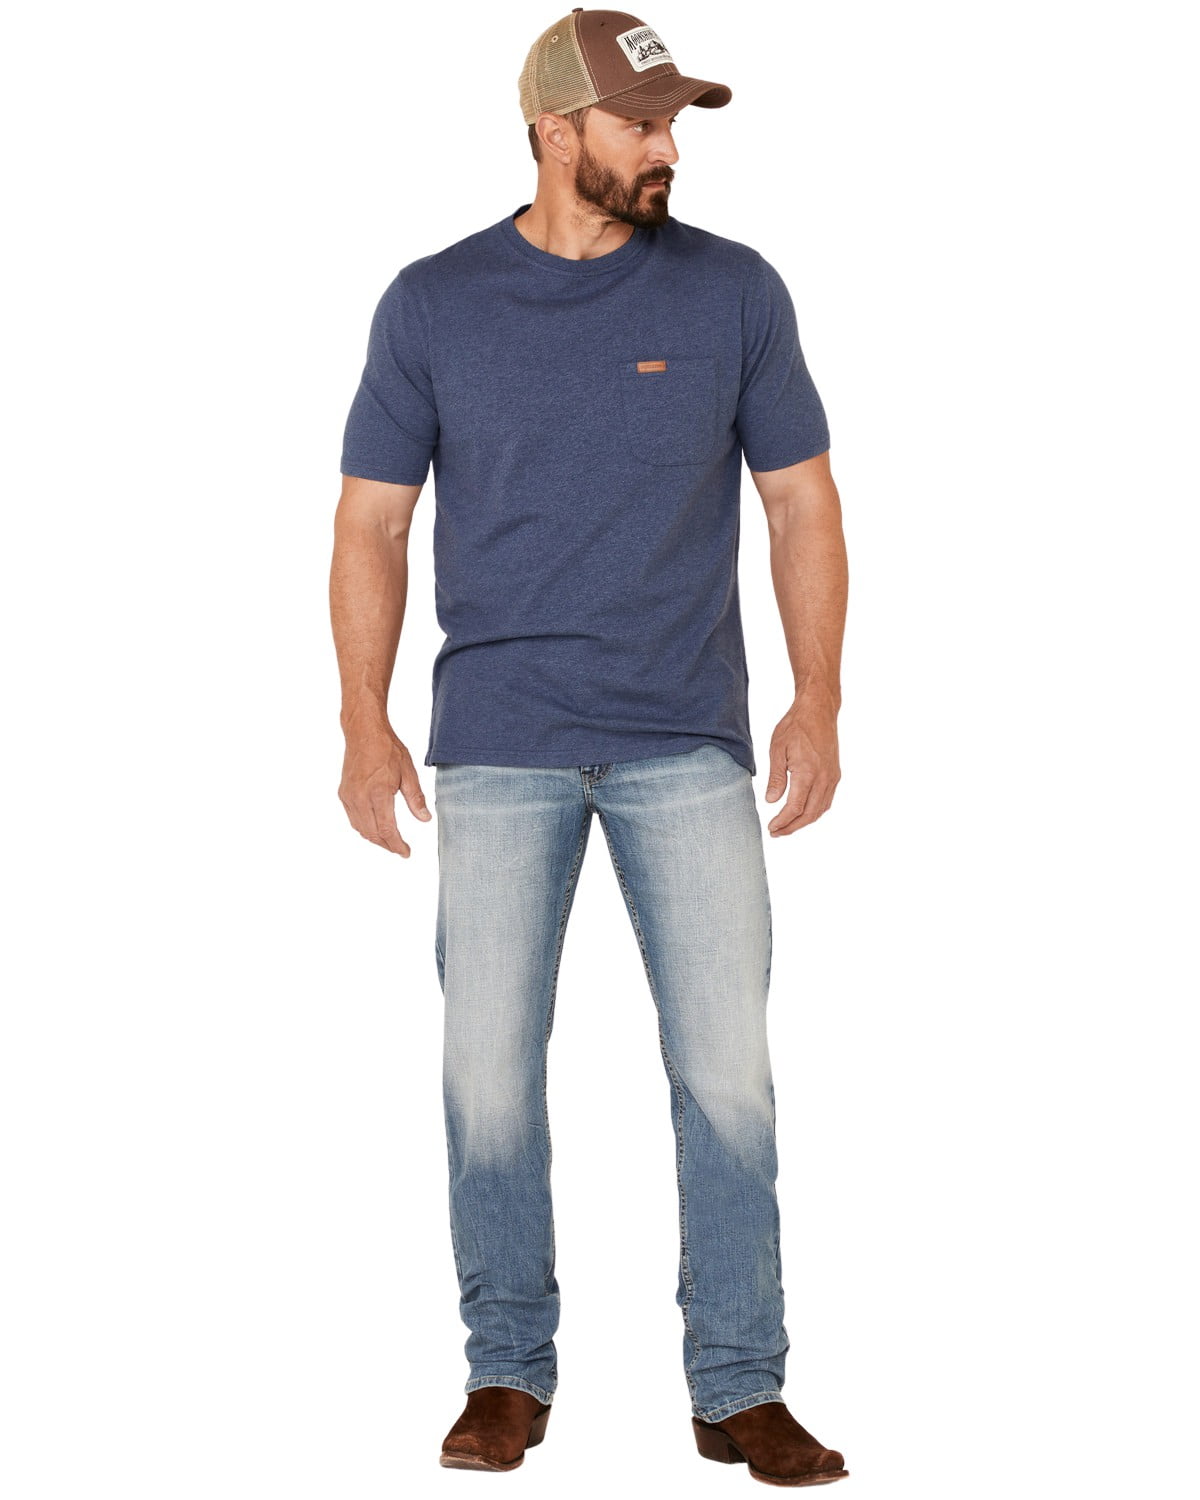 Studio 88 - 2 pairs of Nautic Spirit Jeans at a steal, don't sleep on our  seasonal promo! 2 pairs for R600.00 Nautic Spirit Denim. 13th April - 18th  April 2022 https://bit.ly/3M3mHib